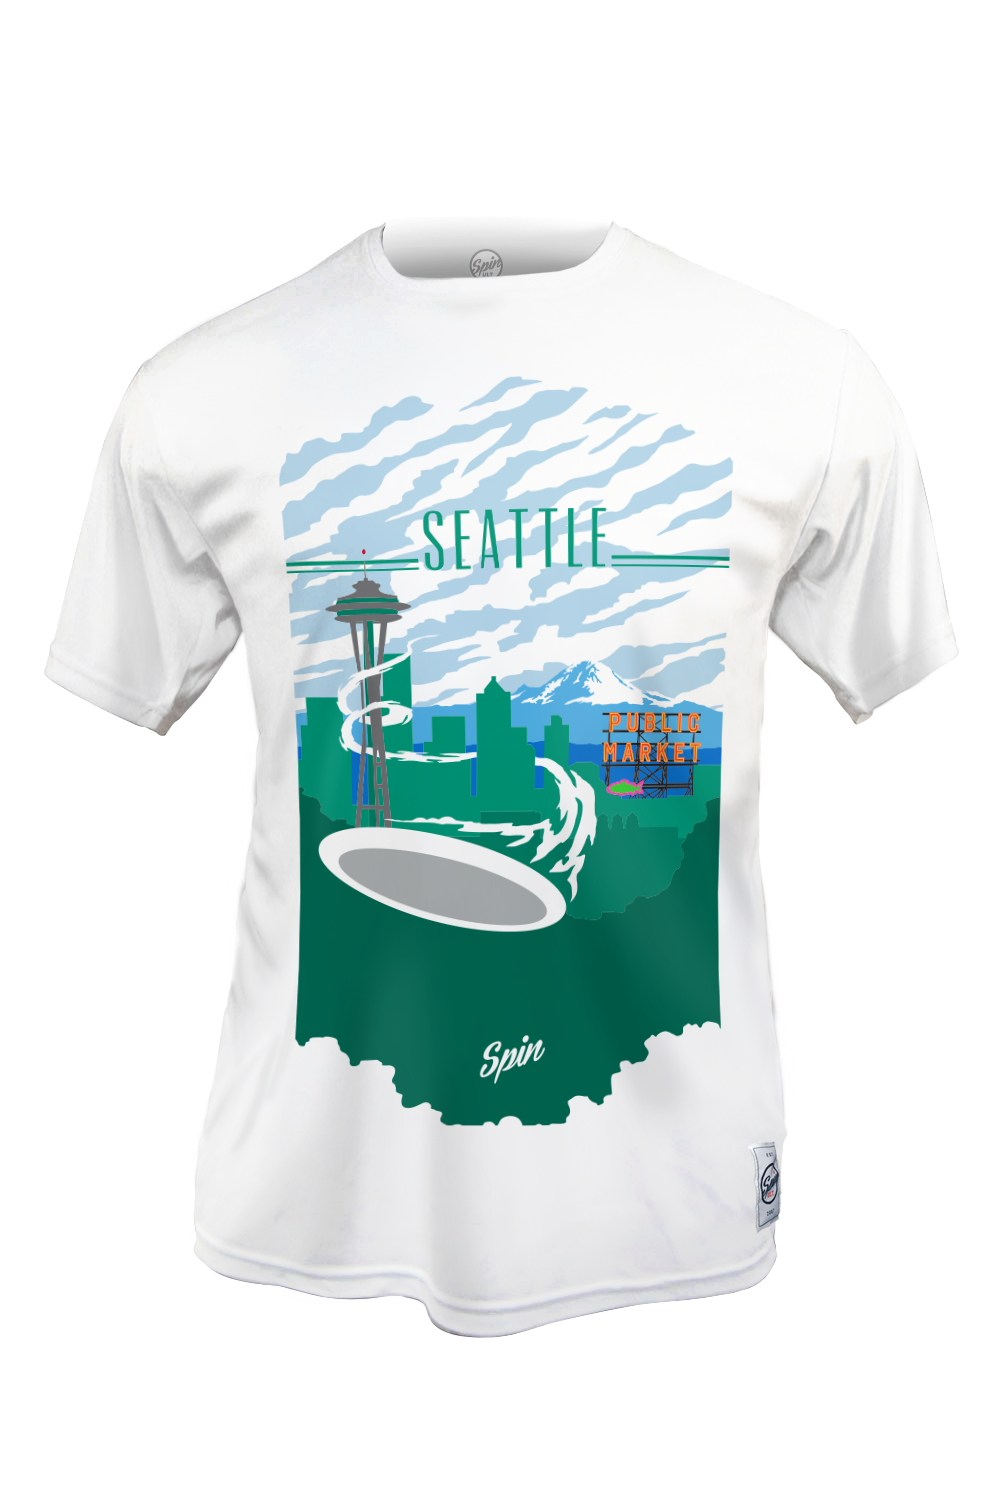 Seattle Short Sleeve Jersey – Spin Ultimate